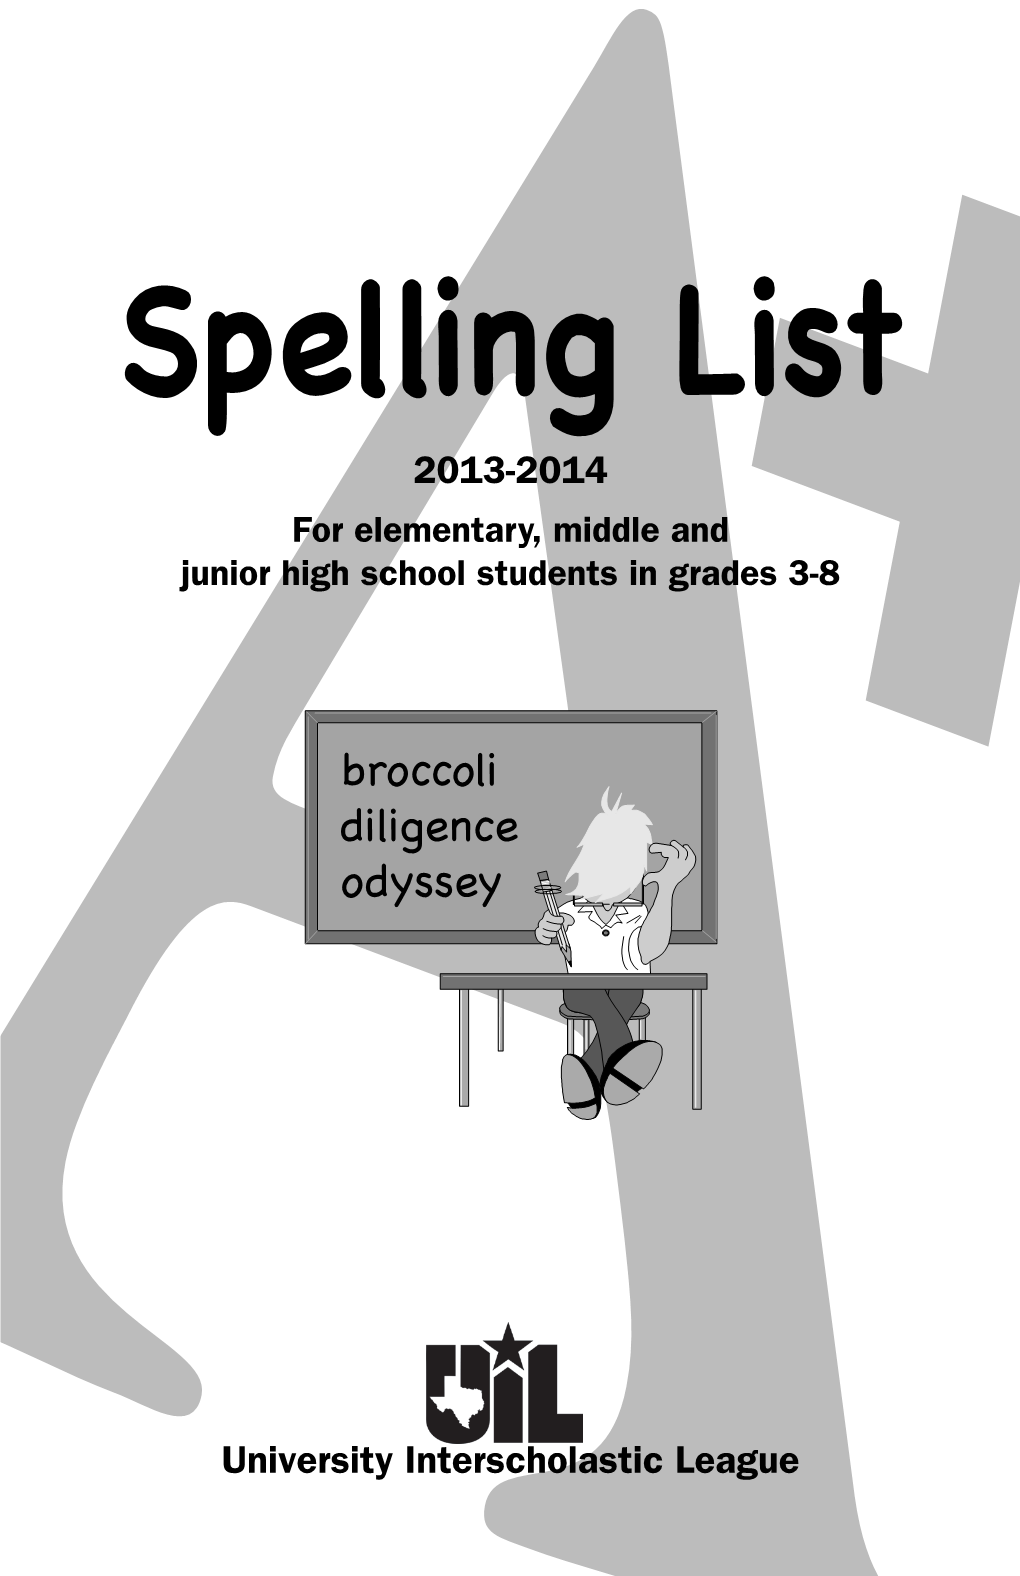 Spelling List 2013-2014 for Elementary, Middle and Junior High School Students in Grades 3-8